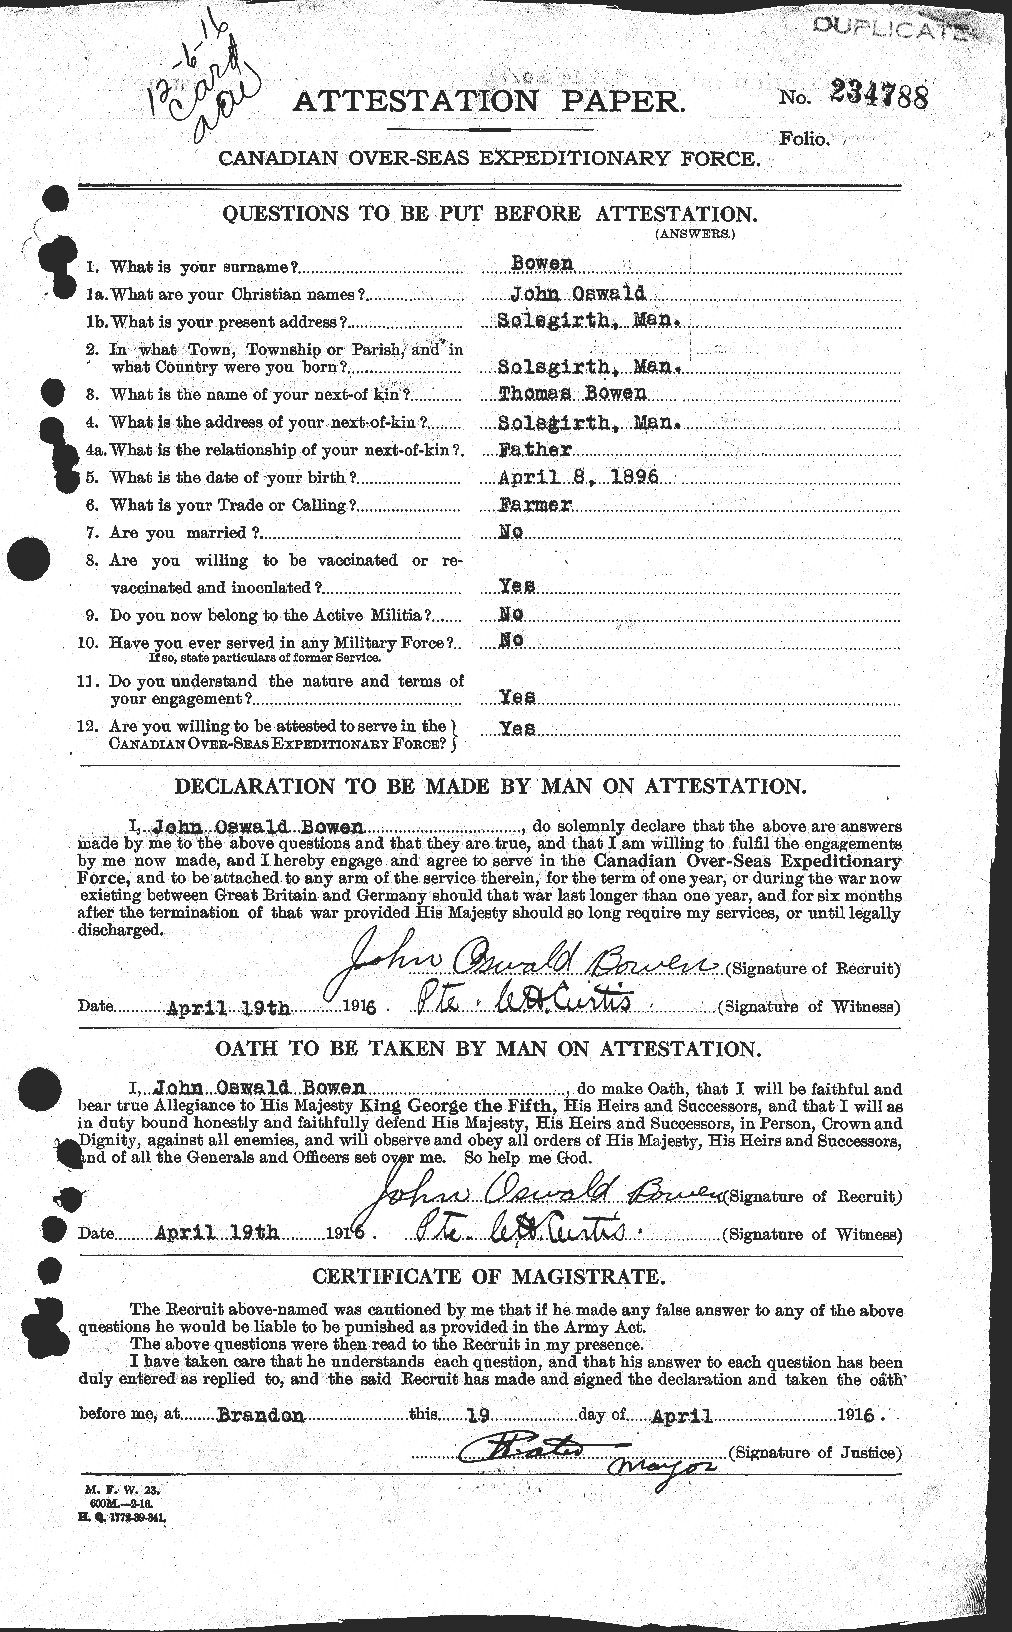 Personnel Records of the First World War - CEF 255443a